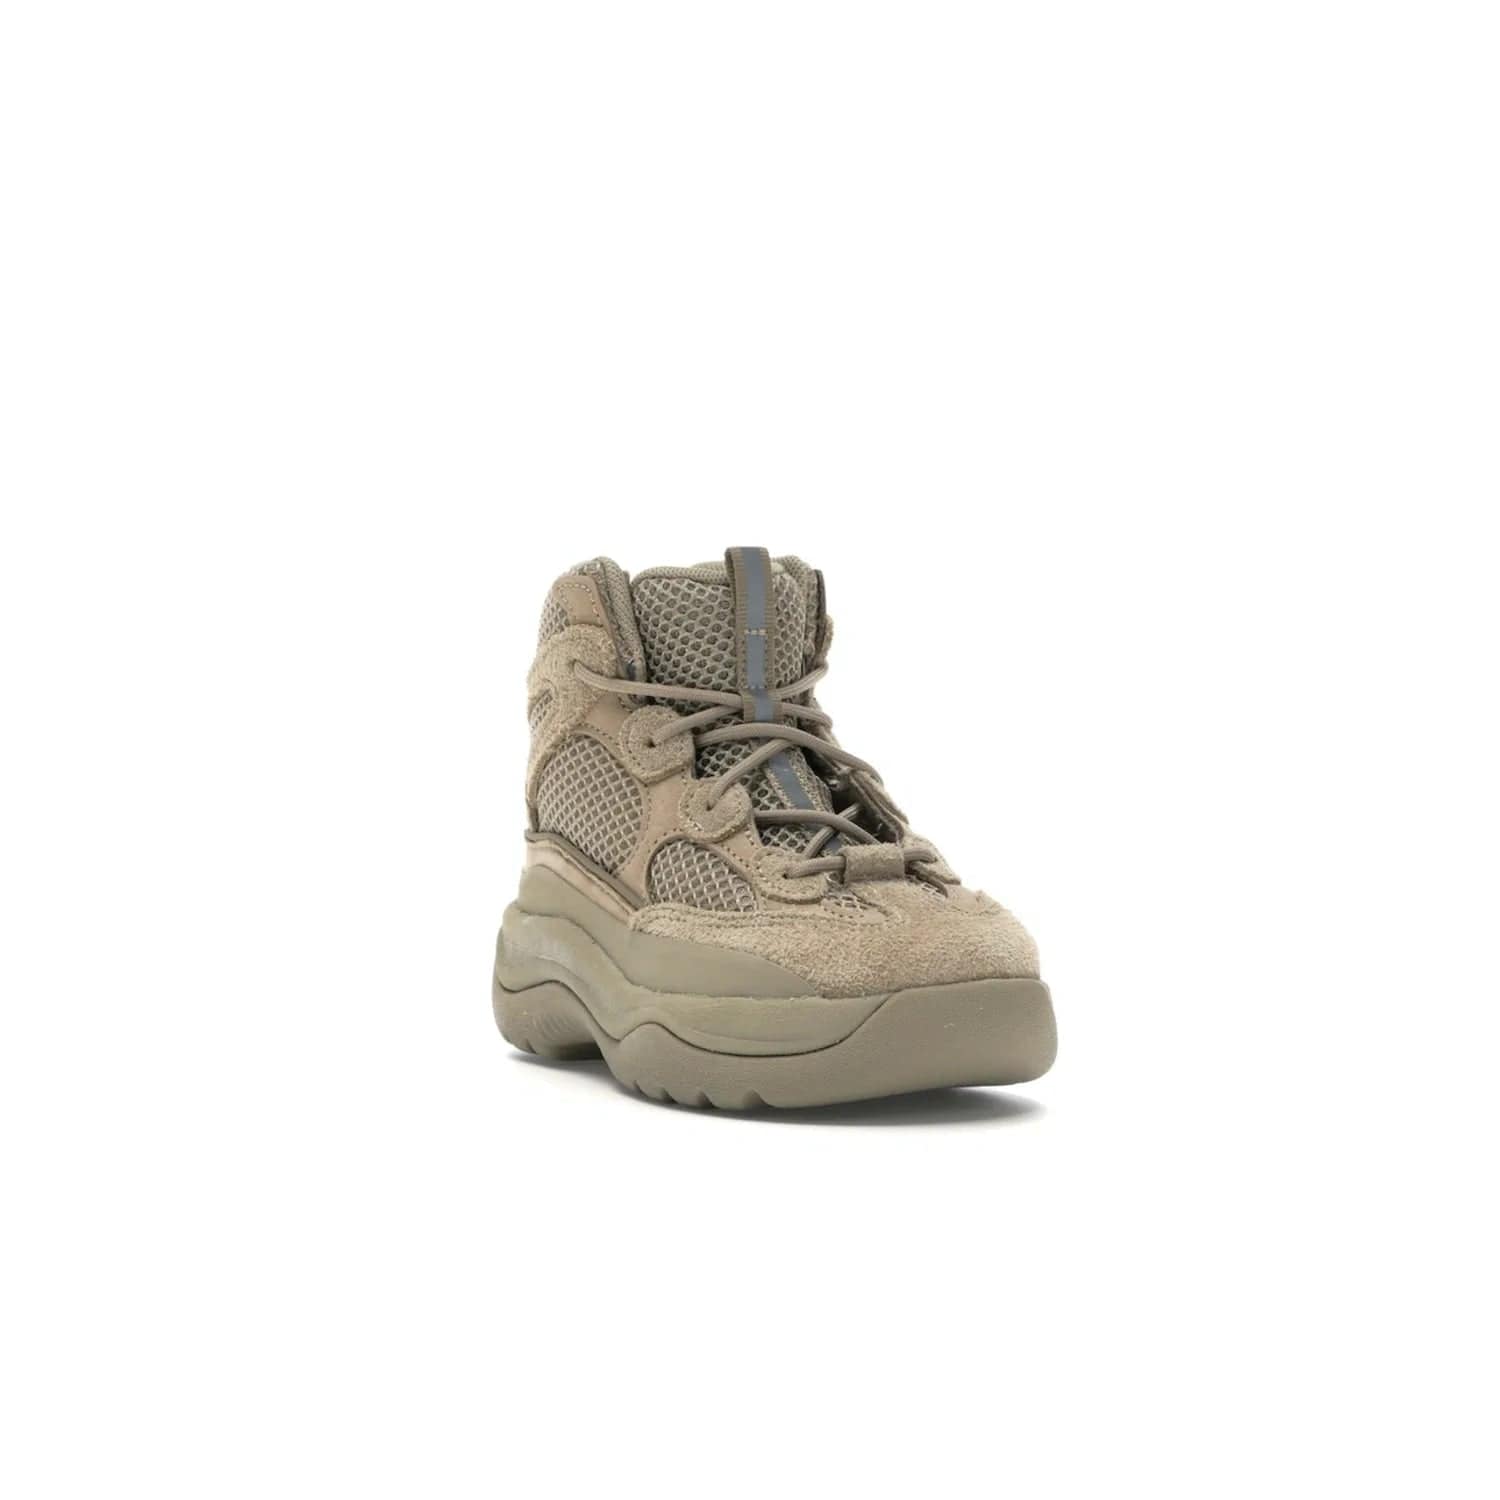 adidas Yeezy Desert Boot Rock (Kids) - Image 7 - Only at www.BallersClubKickz.com - Elevate your style this season with the adidas Yeezy Desert Boot Rock. Crafted from layered nylon and suede, this chic kids' silhouette features an EVA midsole and rubber outsole for superior cushioning and traction.